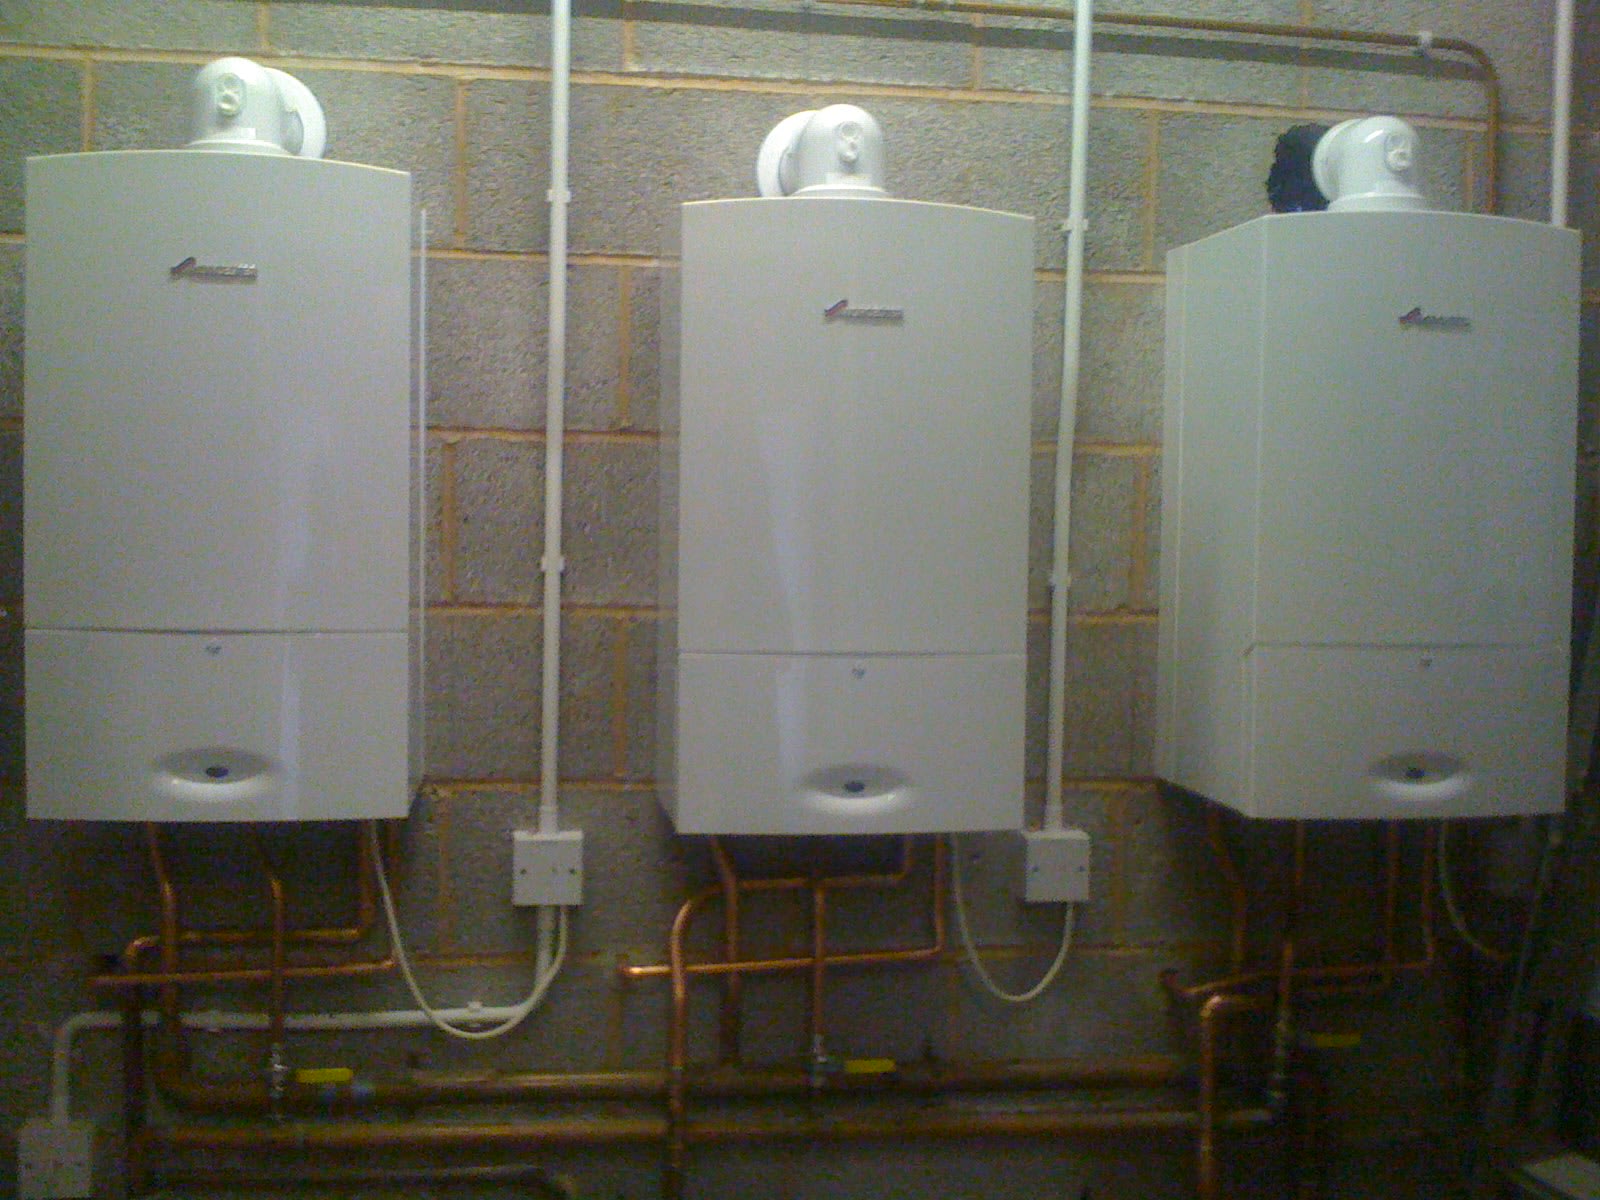 Images Adrian Sims Plumbing & Heating Services